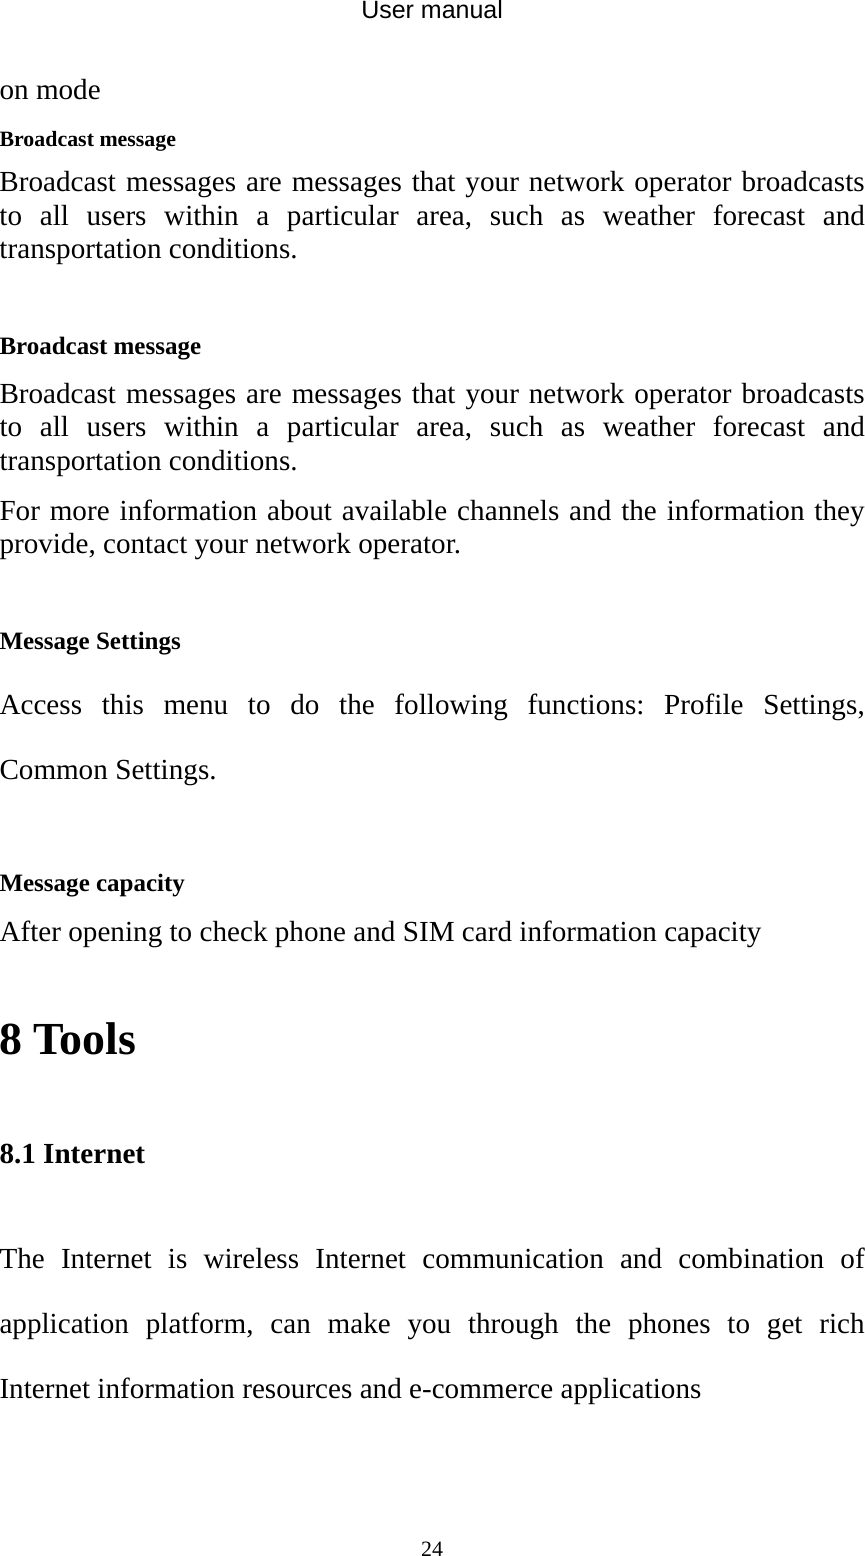 User manual  24on mode   Broadcast message Broadcast messages are messages that your network operator broadcasts to all users within a particular area, such as weather forecast and transportation conditions.  Broadcast message Broadcast messages are messages that your network operator broadcasts to all users within a particular area, such as weather forecast and transportation conditions. For more information about available channels and the information they provide, contact your network operator.  Message Settings Access this menu to do the following functions: Profile Settings, Common Settings.  Message capacity After opening to check phone and SIM card information capacity 8 Tools 8.1 Internet The Internet is wireless Internet communication and combination of application platform, can make you through the phones to get rich Internet information resources and e-commerce applications 